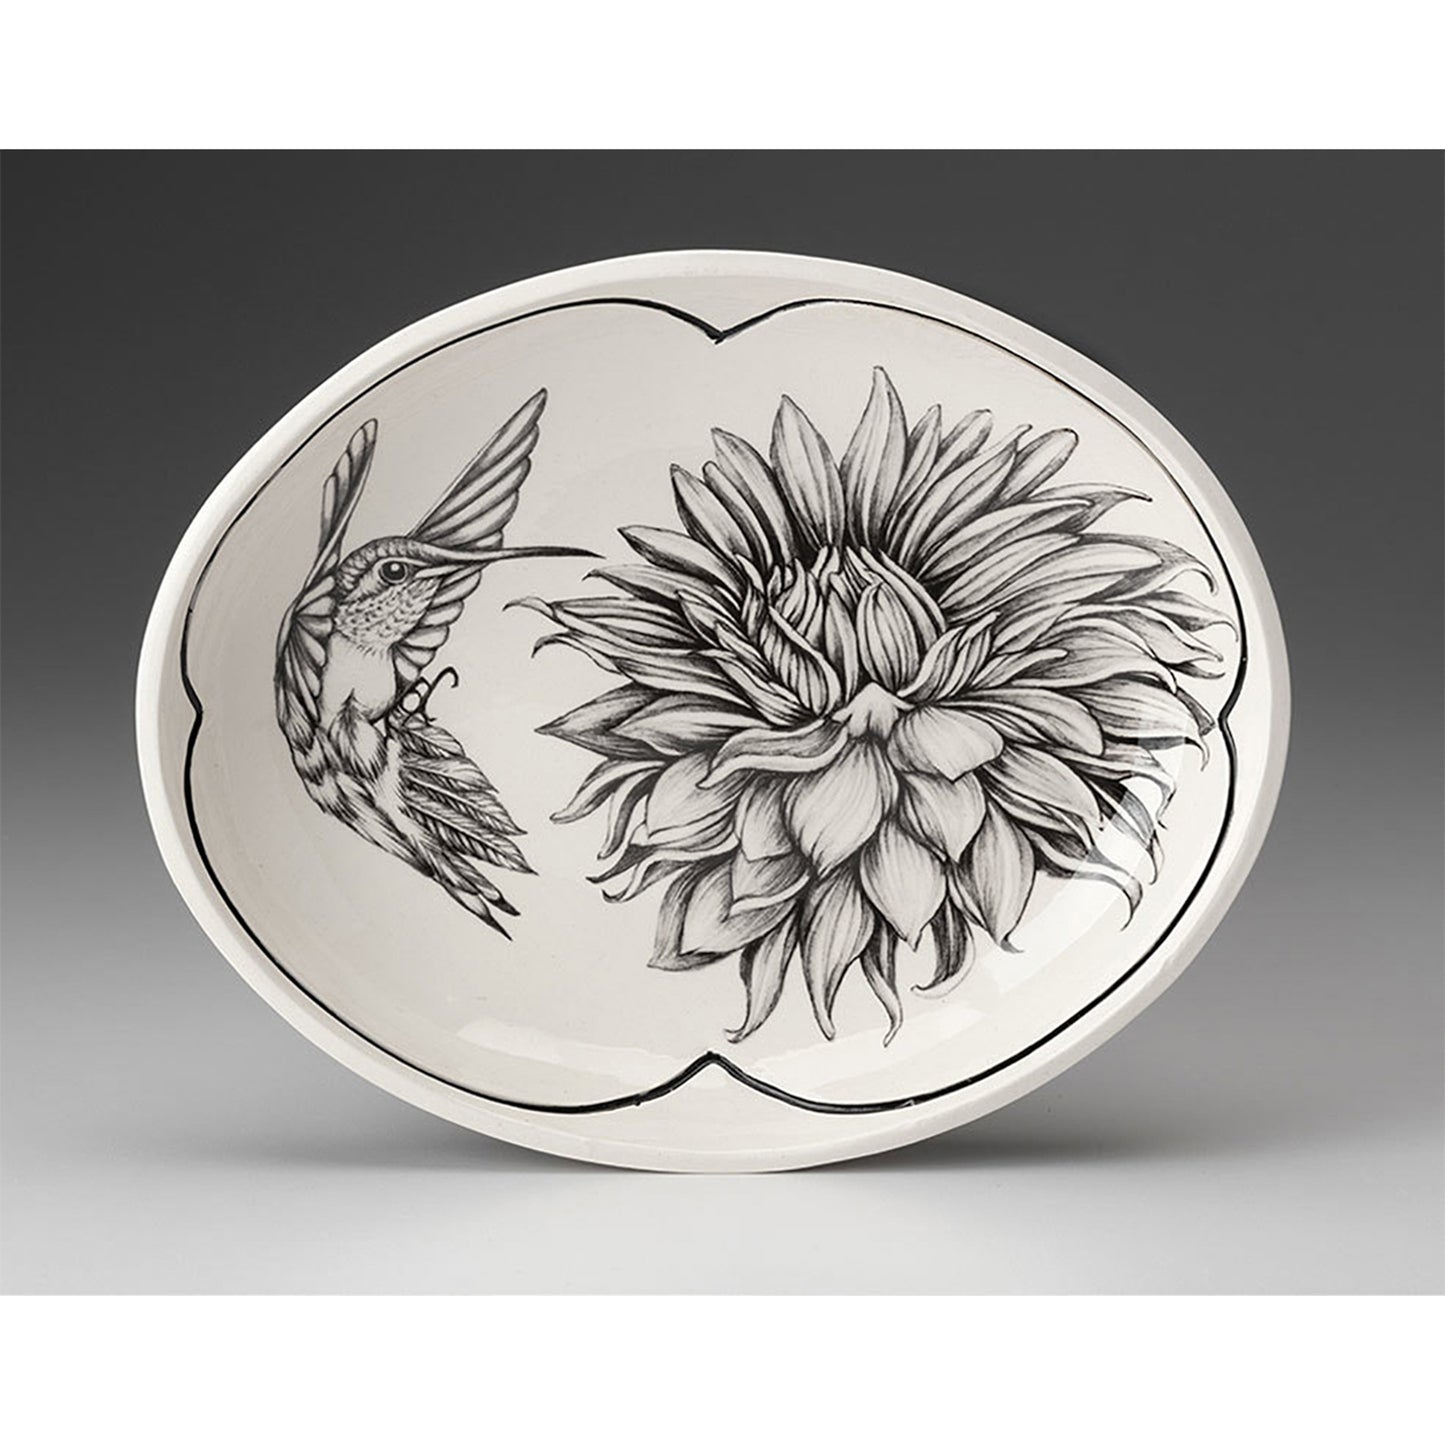 Laura Zindel Small Serving Dish - More designs available